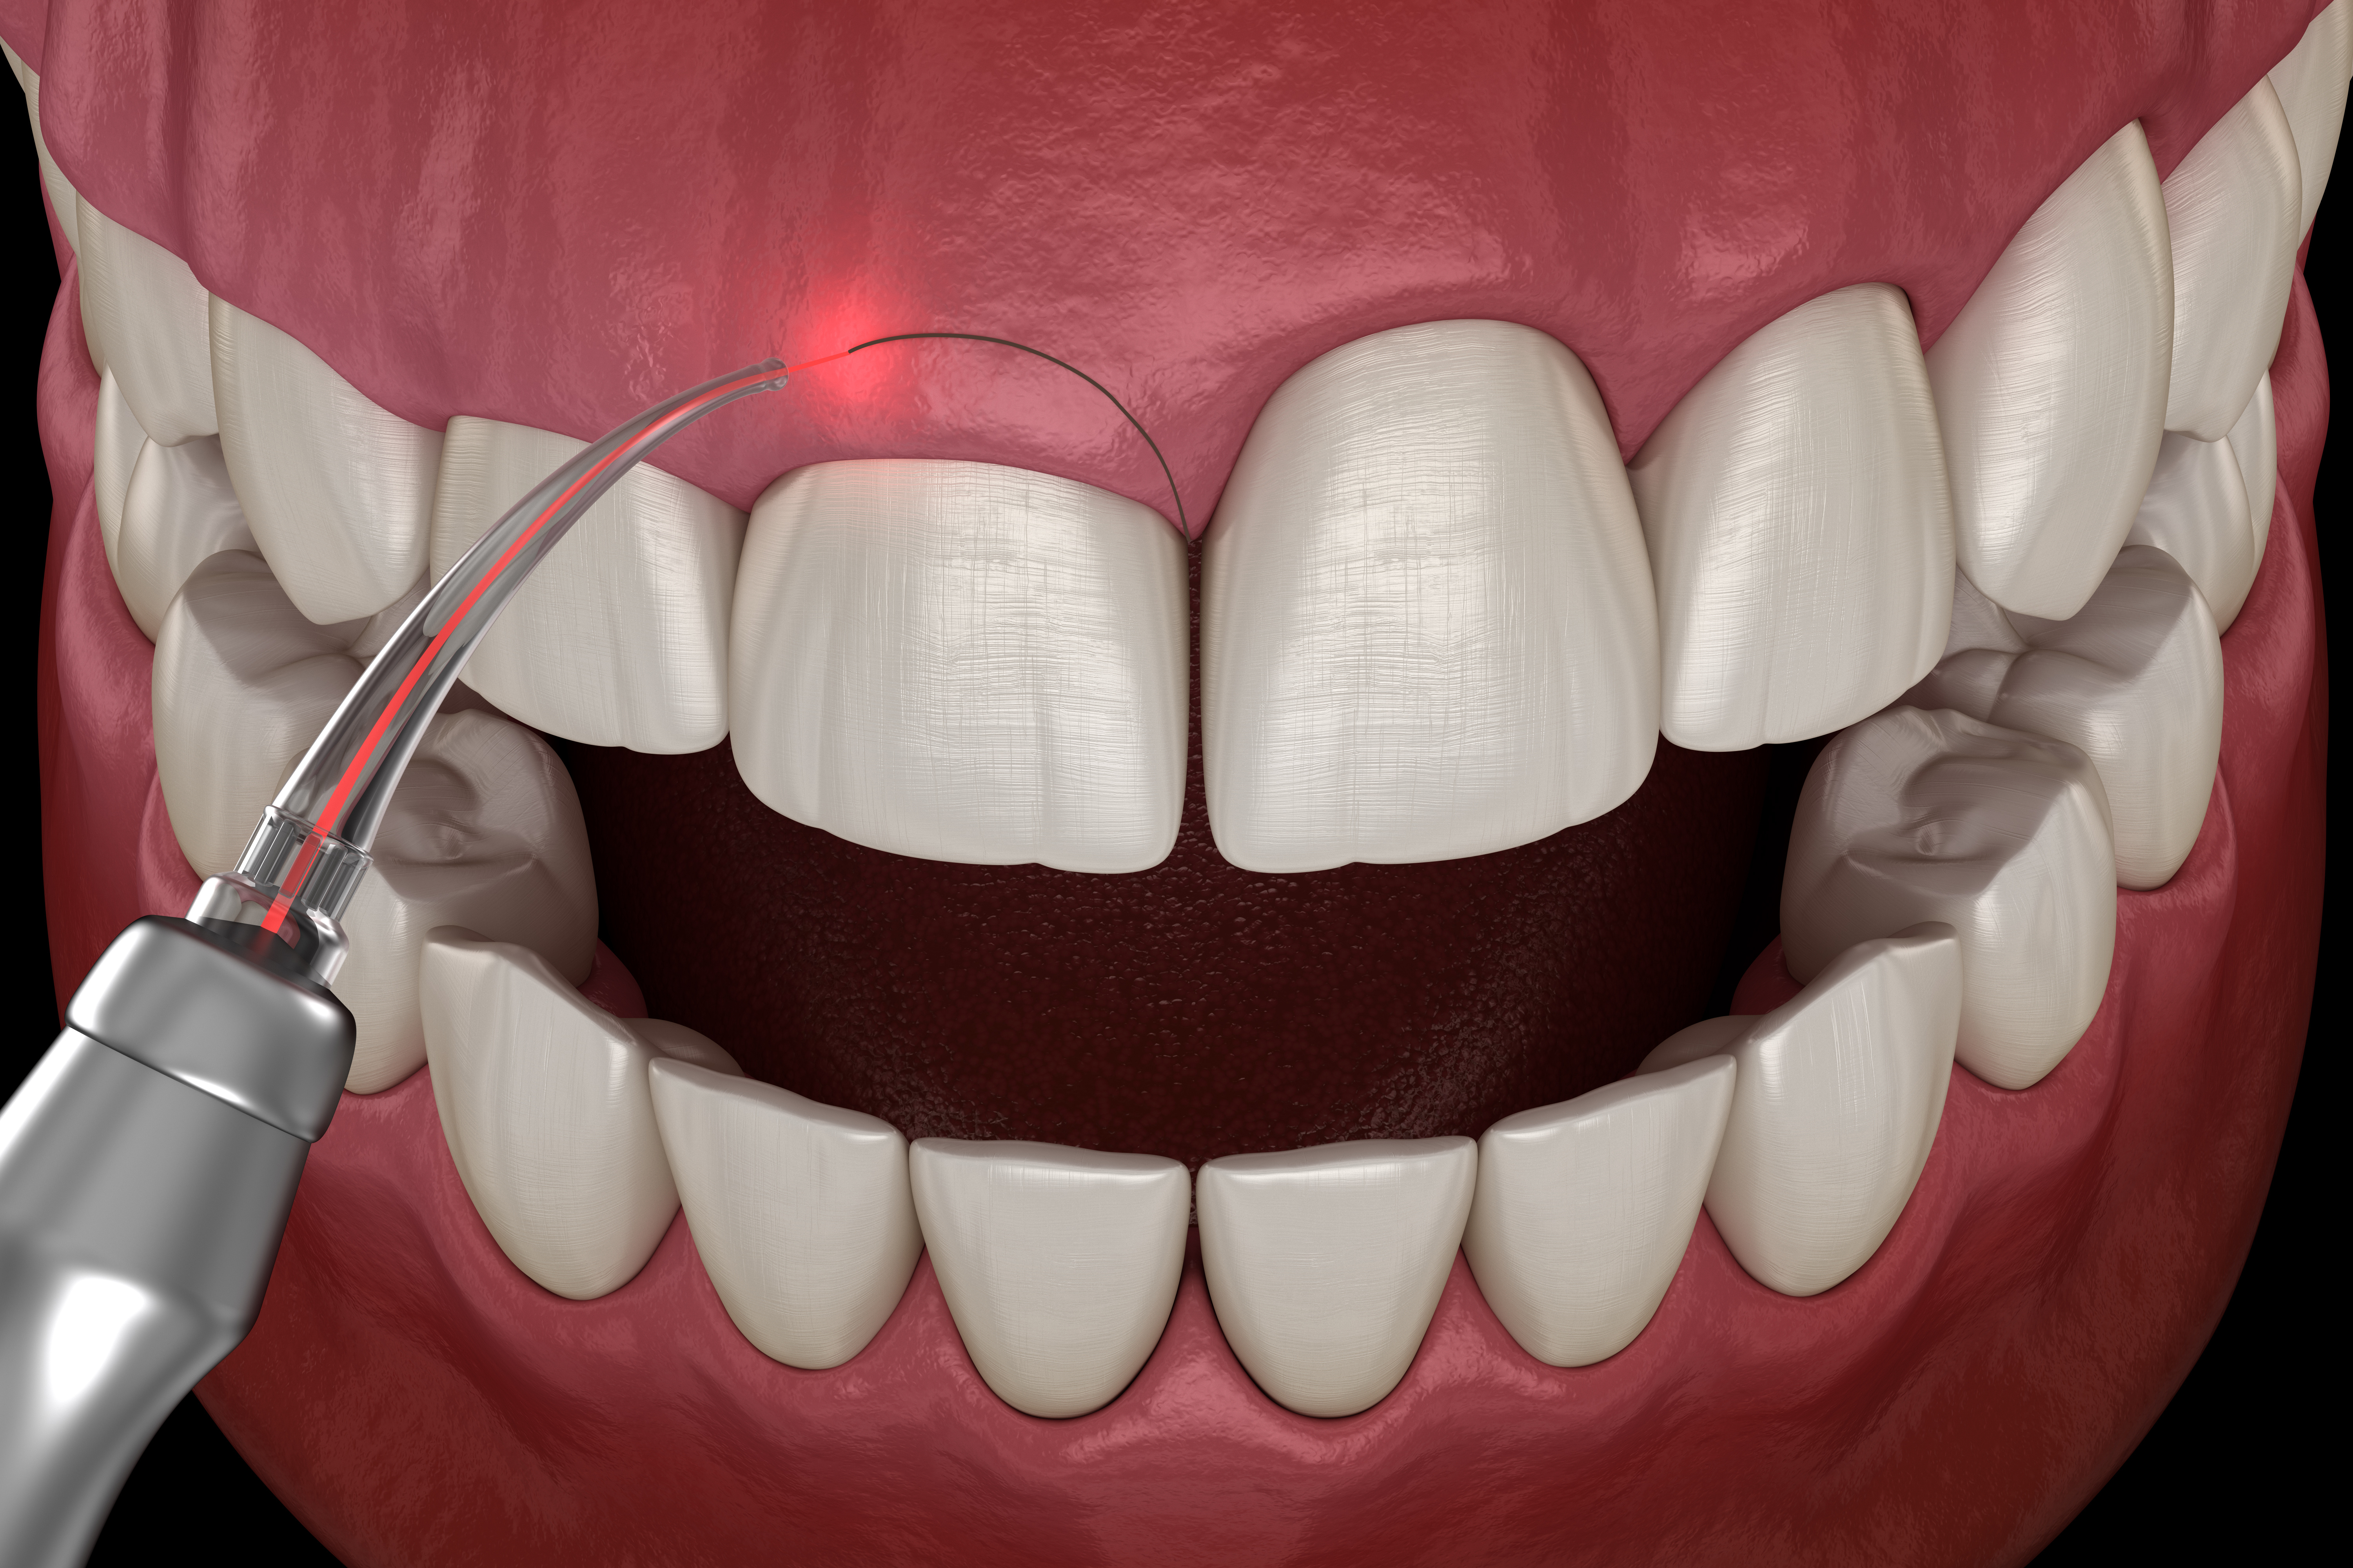 Gingivectomy surgery with laser using. Medically accurate tooth 3D illustration